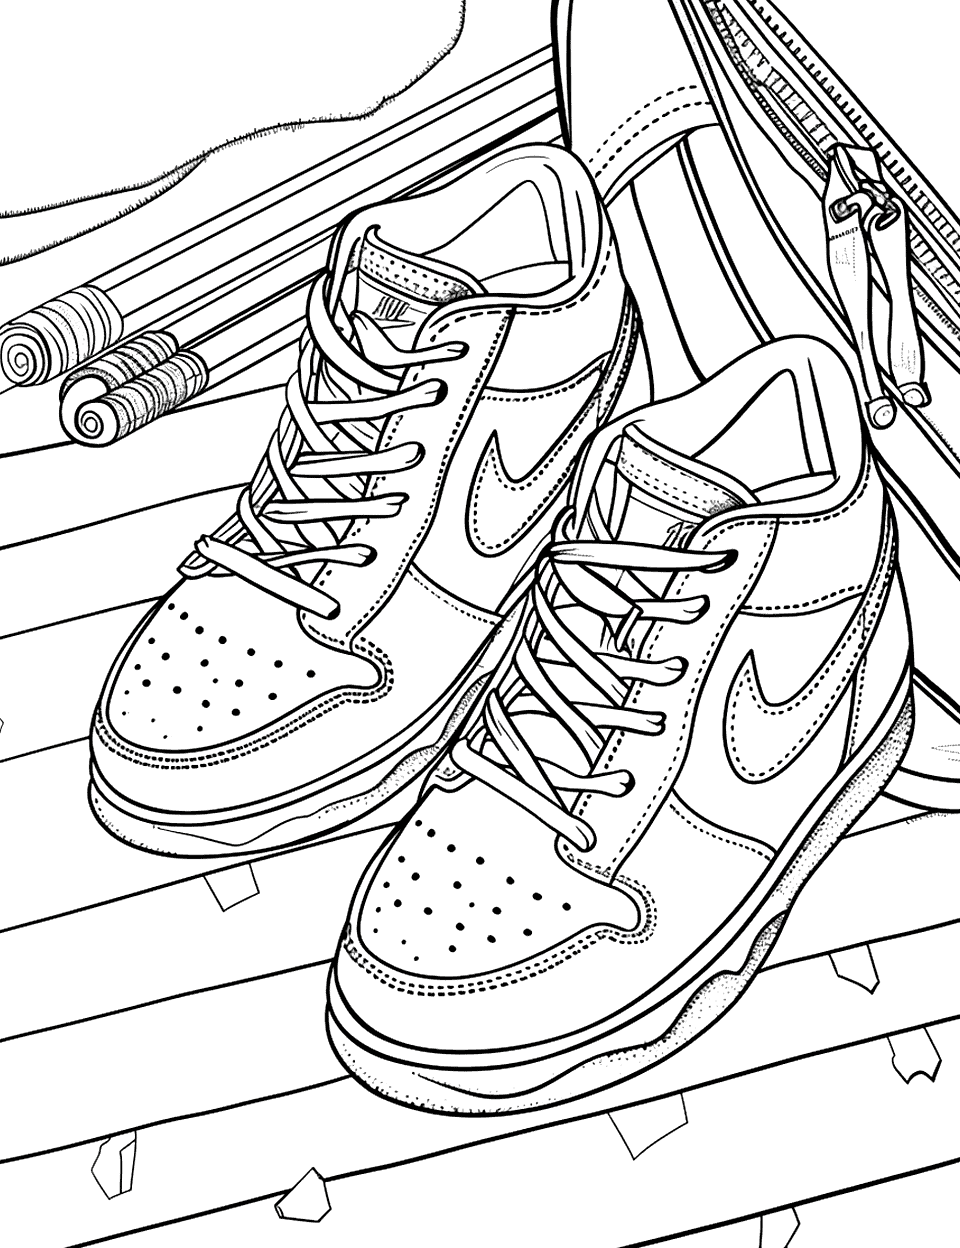 School Shoes on the First Day Shoe Coloring Page - Polished school shoes with a backpack and some pencils on a classroom floor.